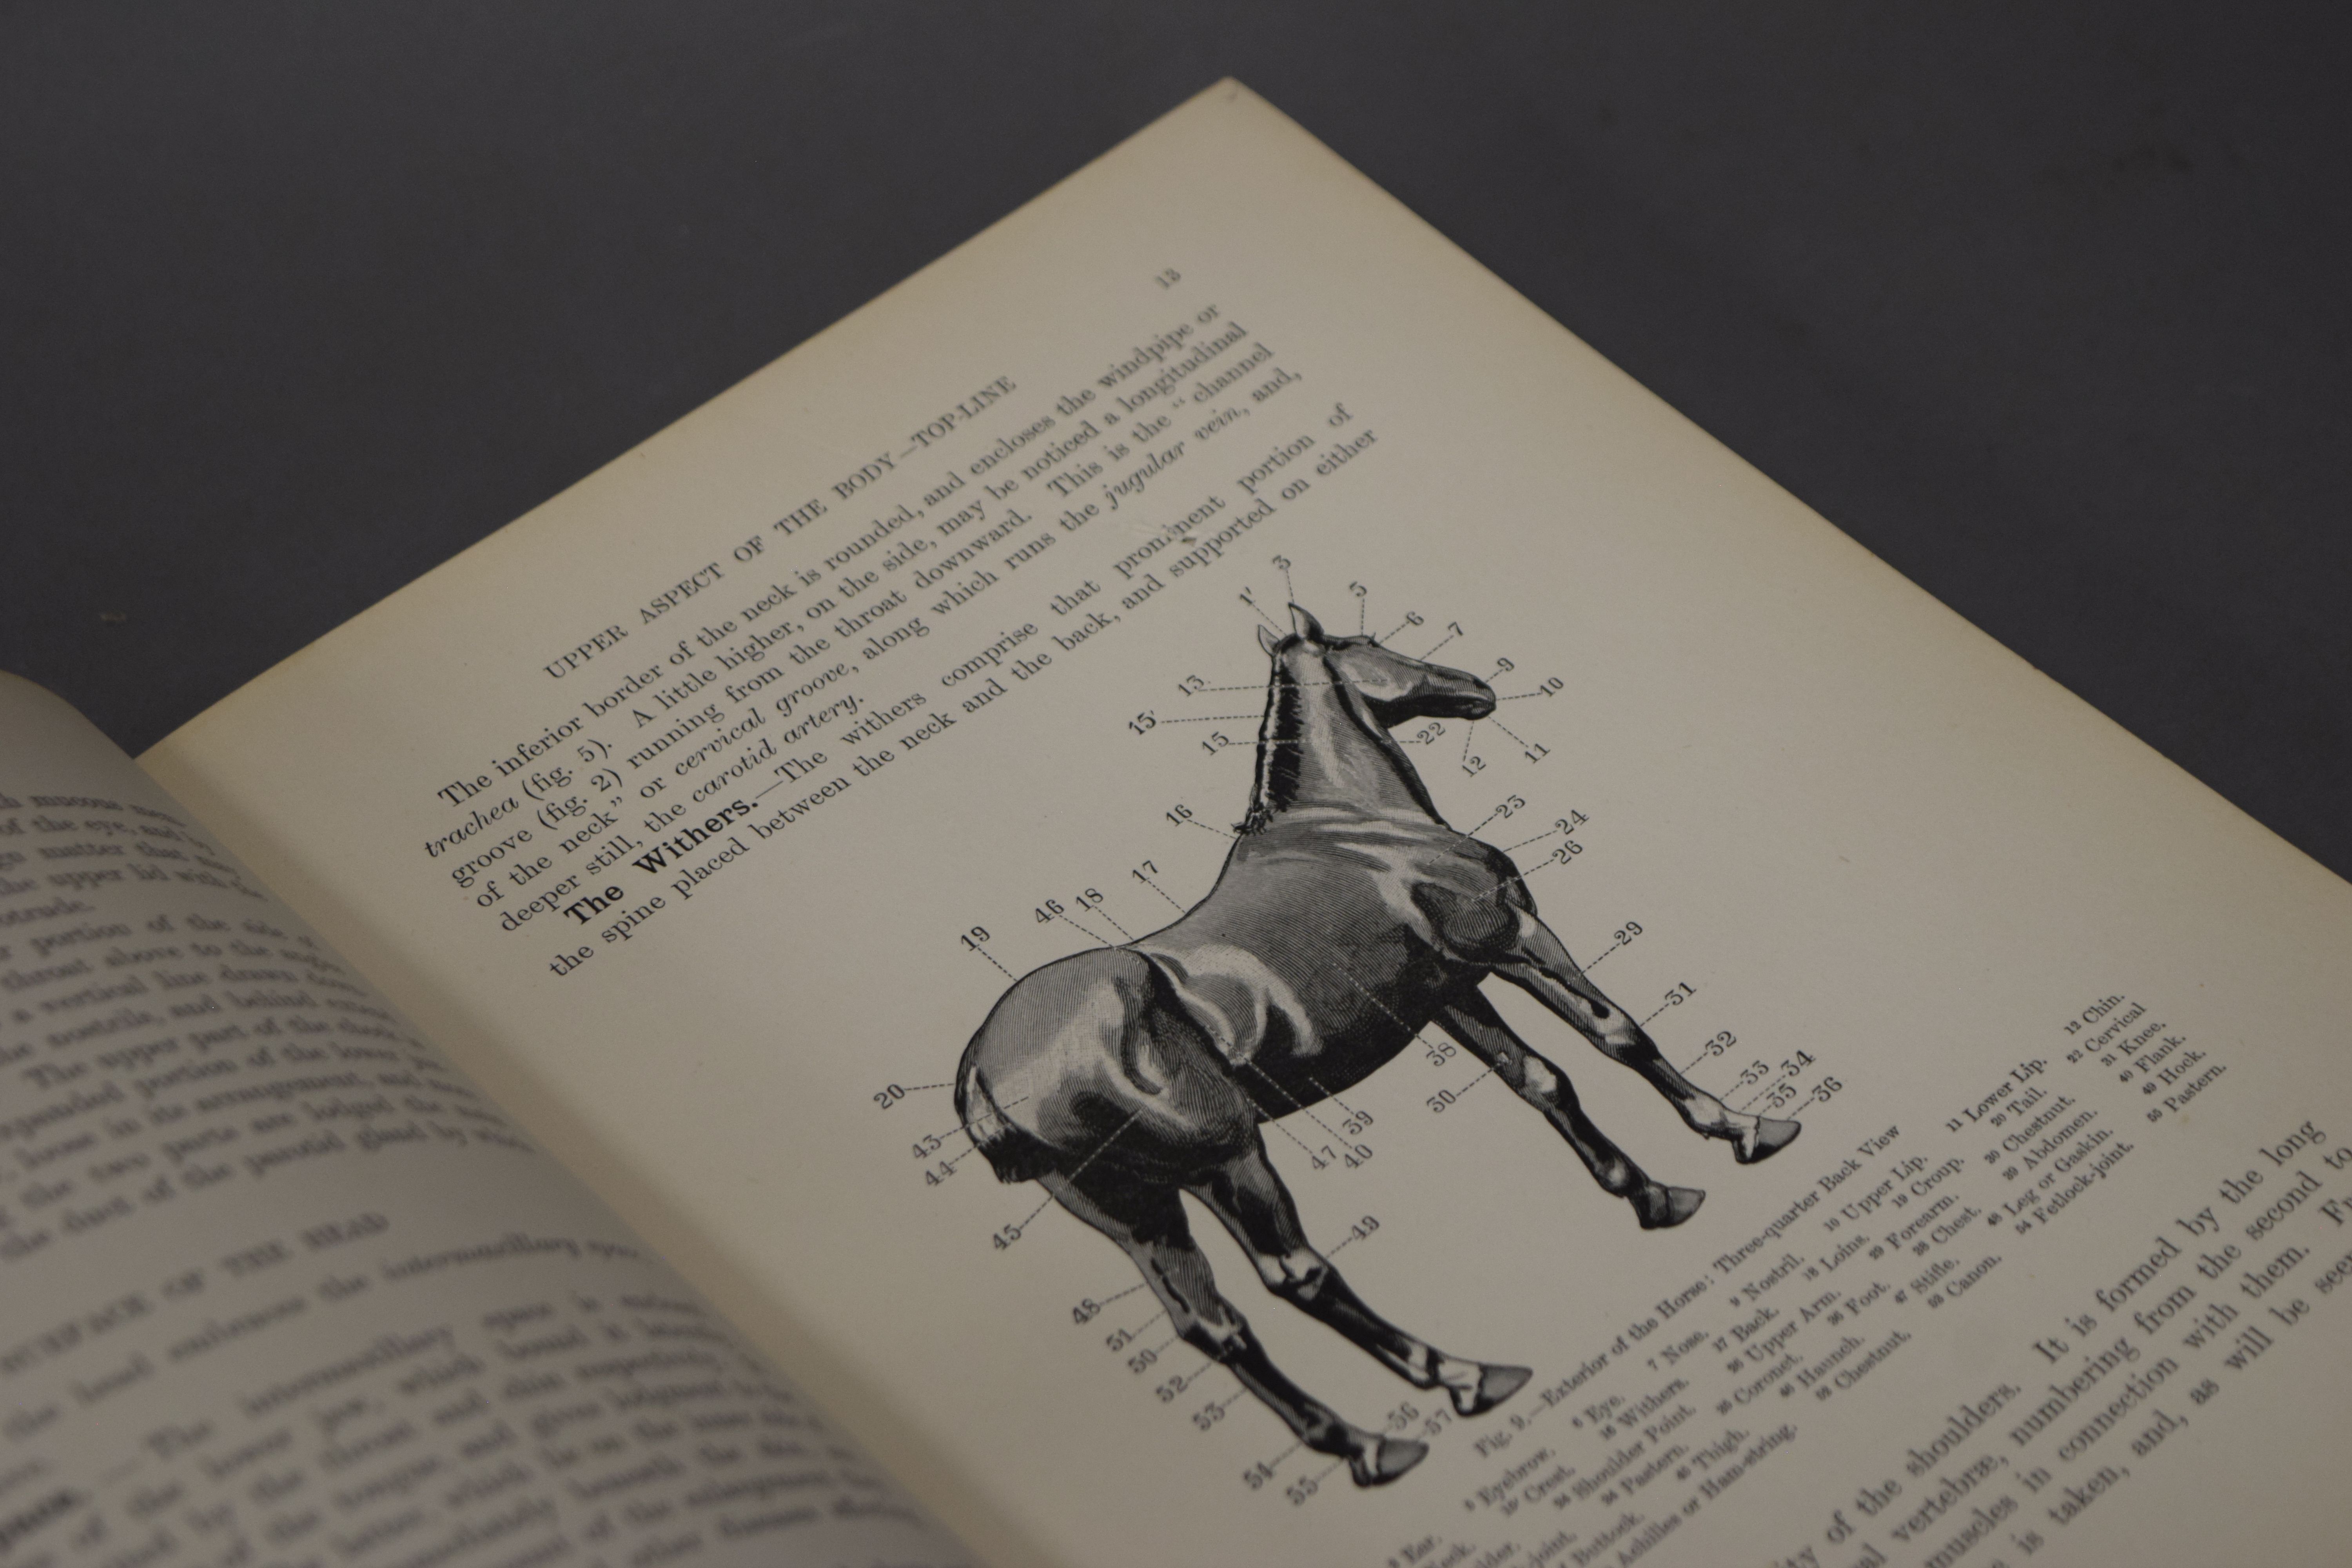 Wortley Axe, Professor J, The Horse Its Treatment in Health and Disease, volume 1. - Image 5 of 5